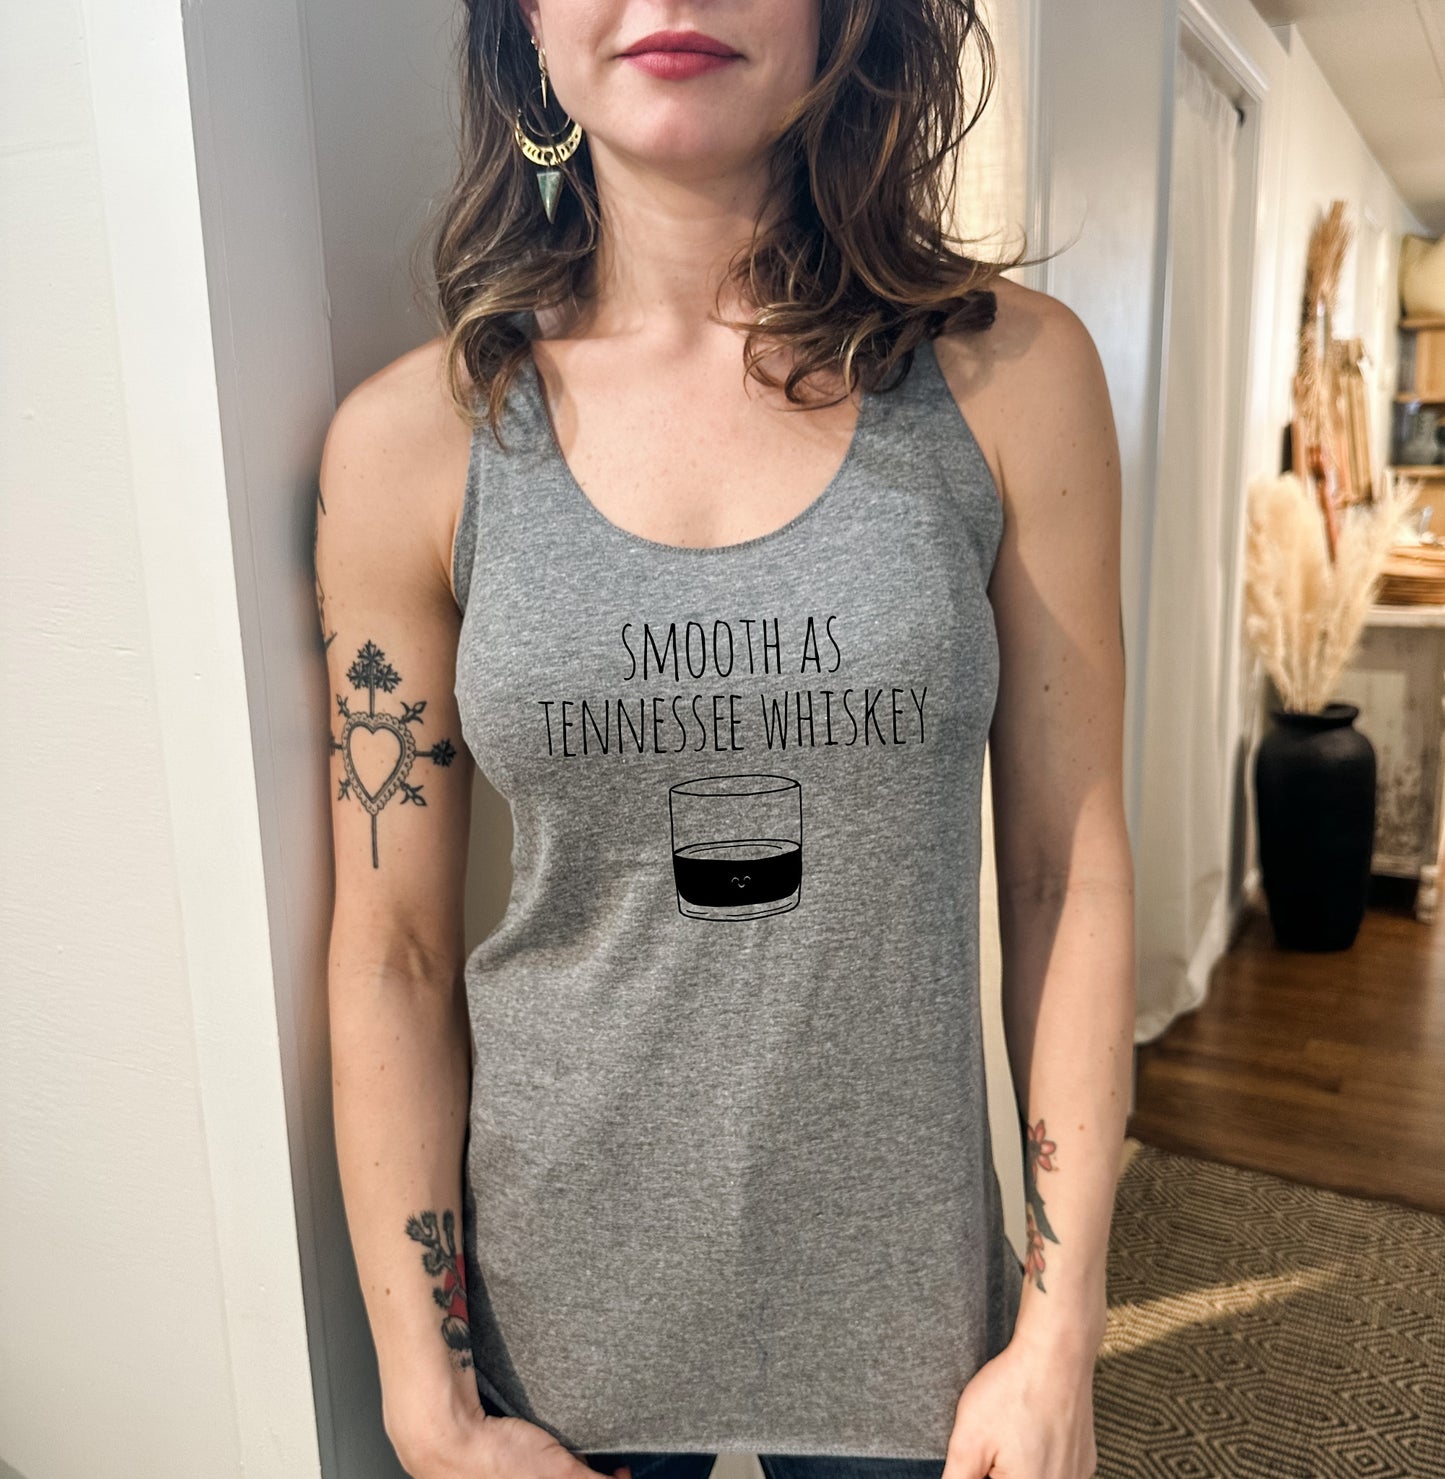 Smooth as Tennessee Whiskey - Women's Tank - Heather Gray, Tahiti, or Envy